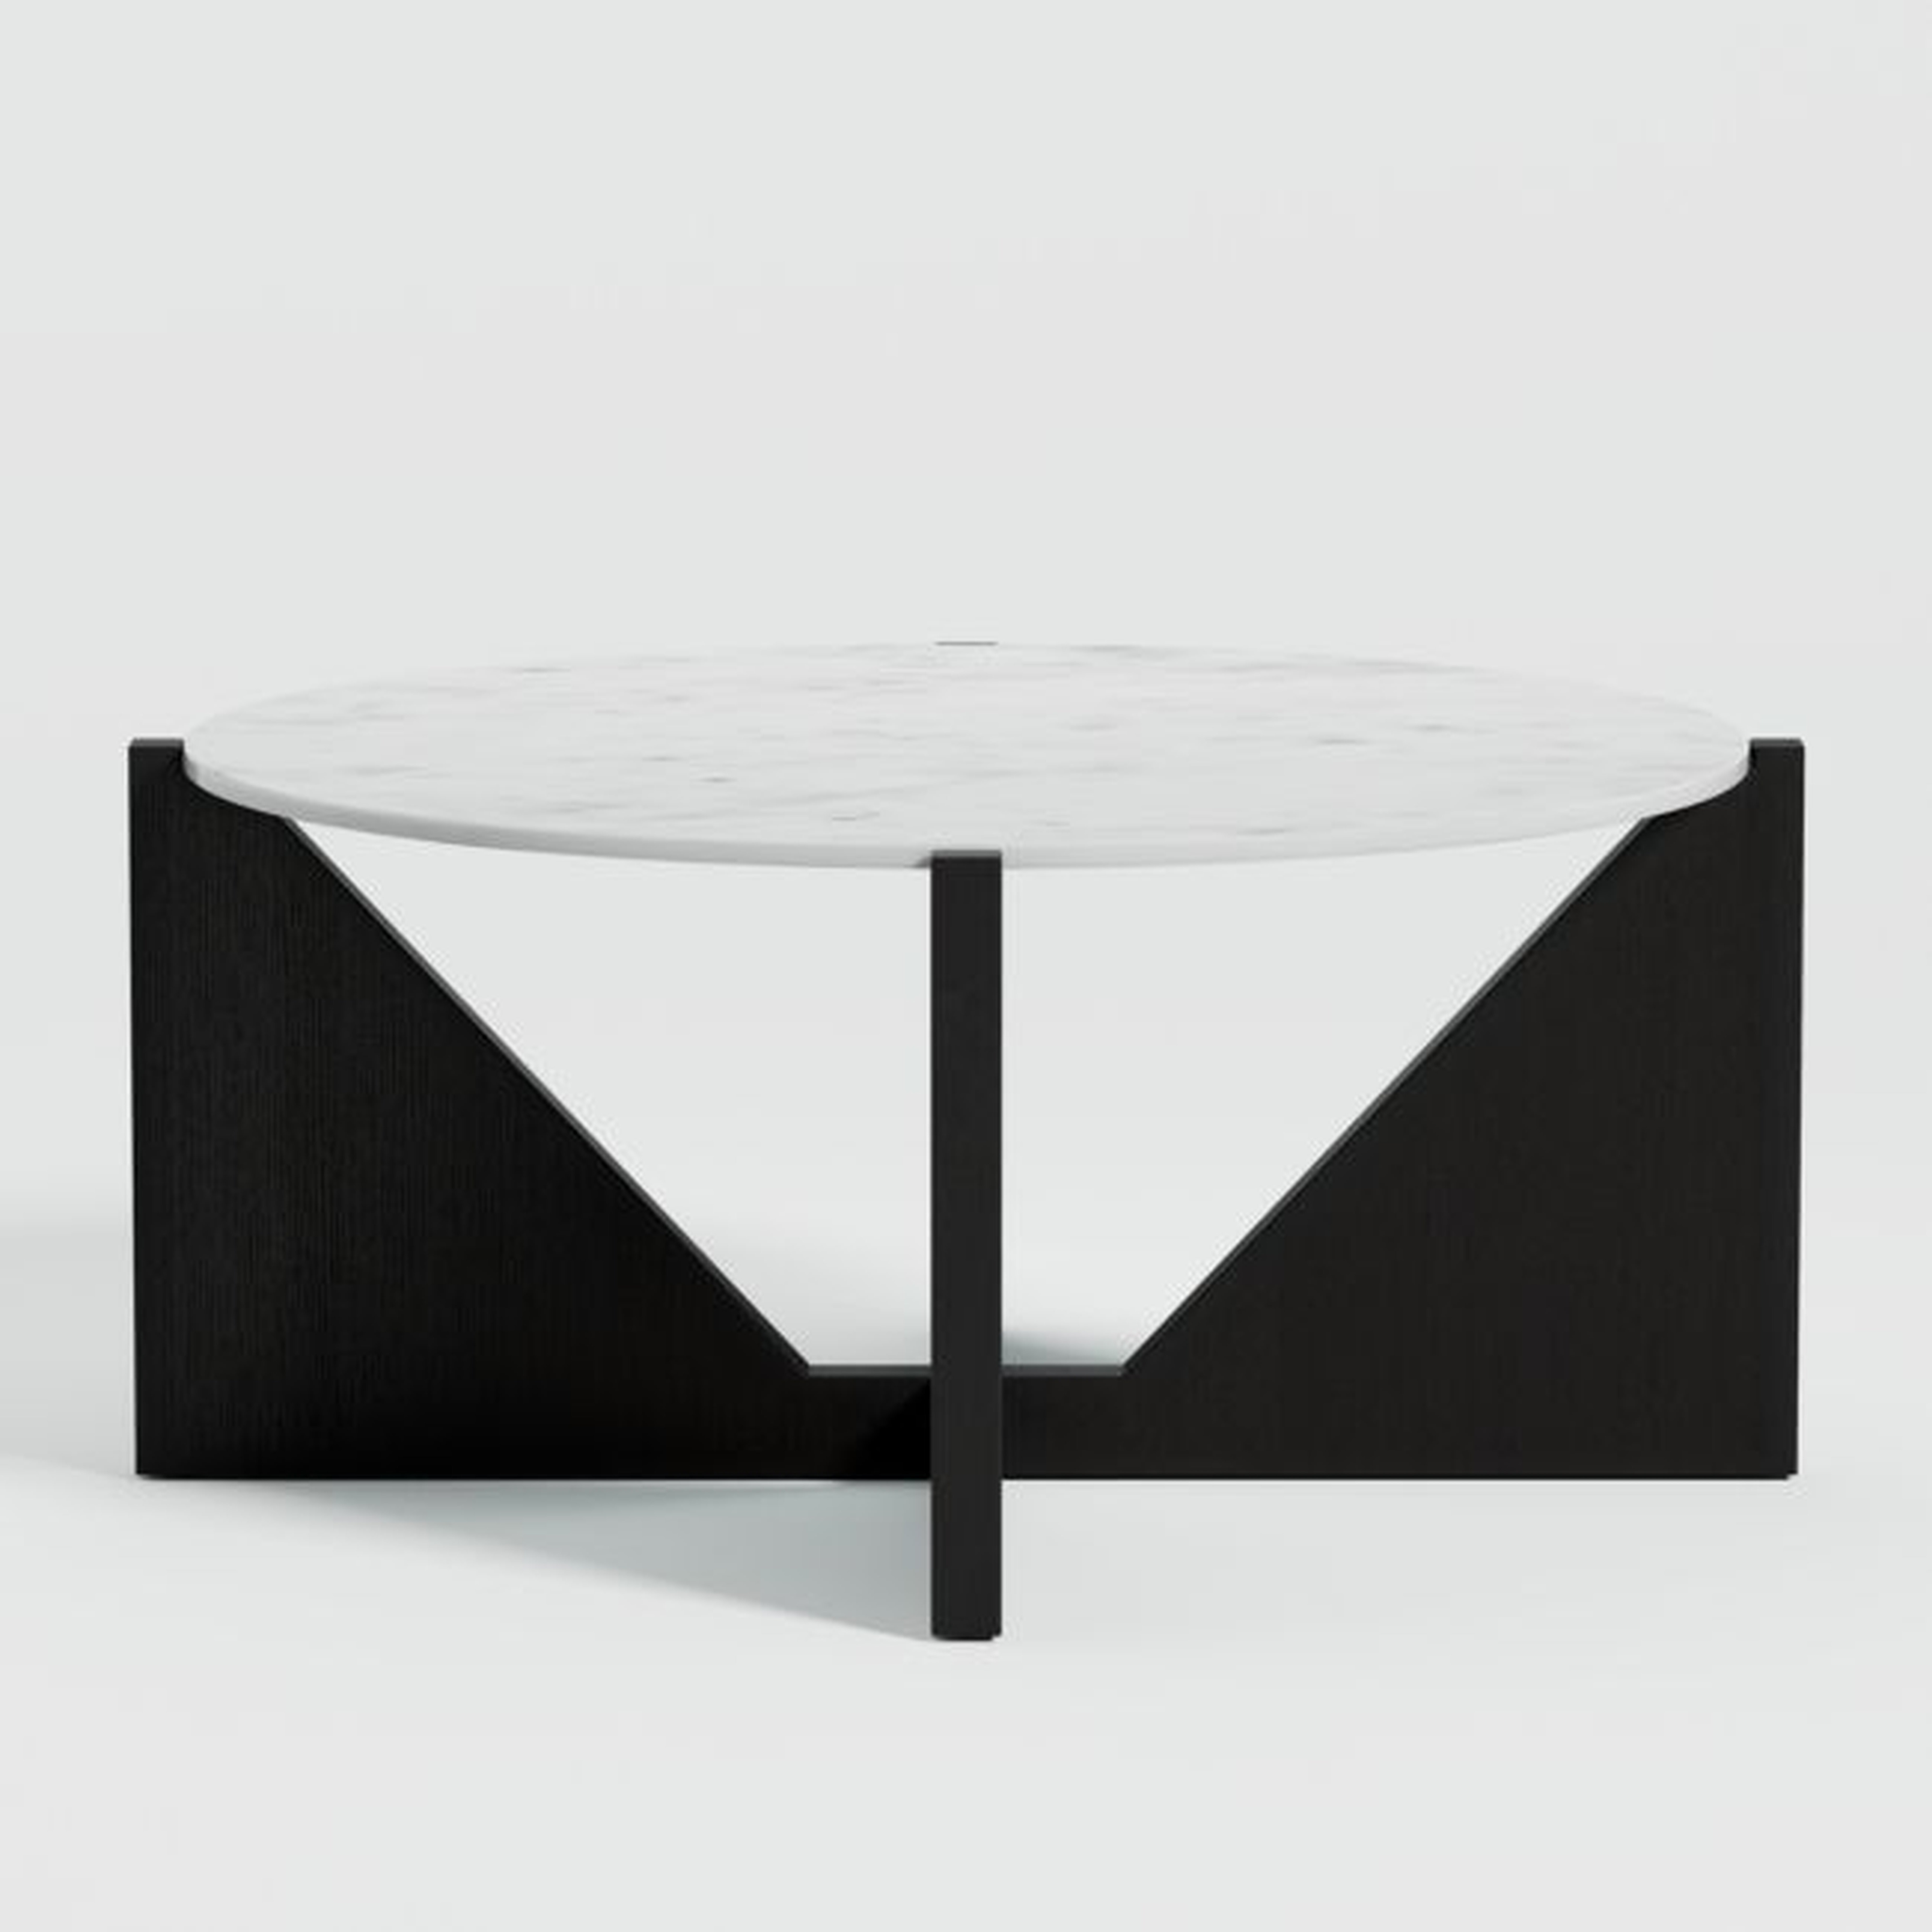 Miro White Marble Coffee Table with Black Wood Base - Crate and Barrel